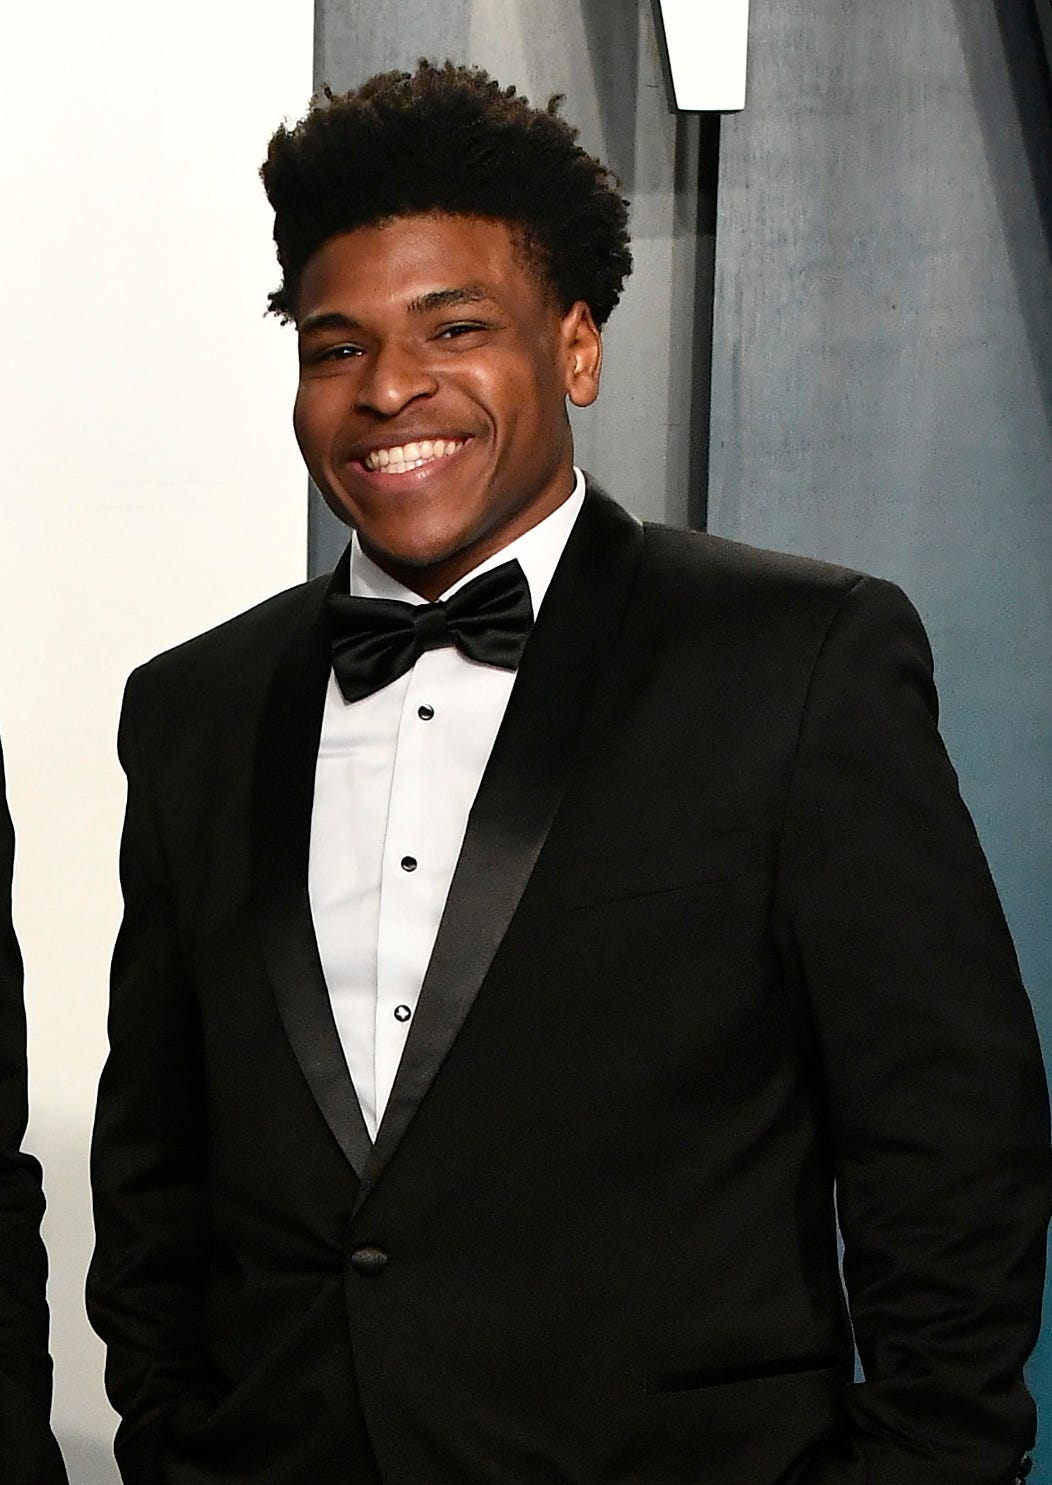 'Cheer' star Jerry Harris' popularity with viewers following the debut of the Netflix series scored the cheerleader an invite to Vanity Fair's Oscar Party on Feb. 9, 2020 in Beverly Hills.